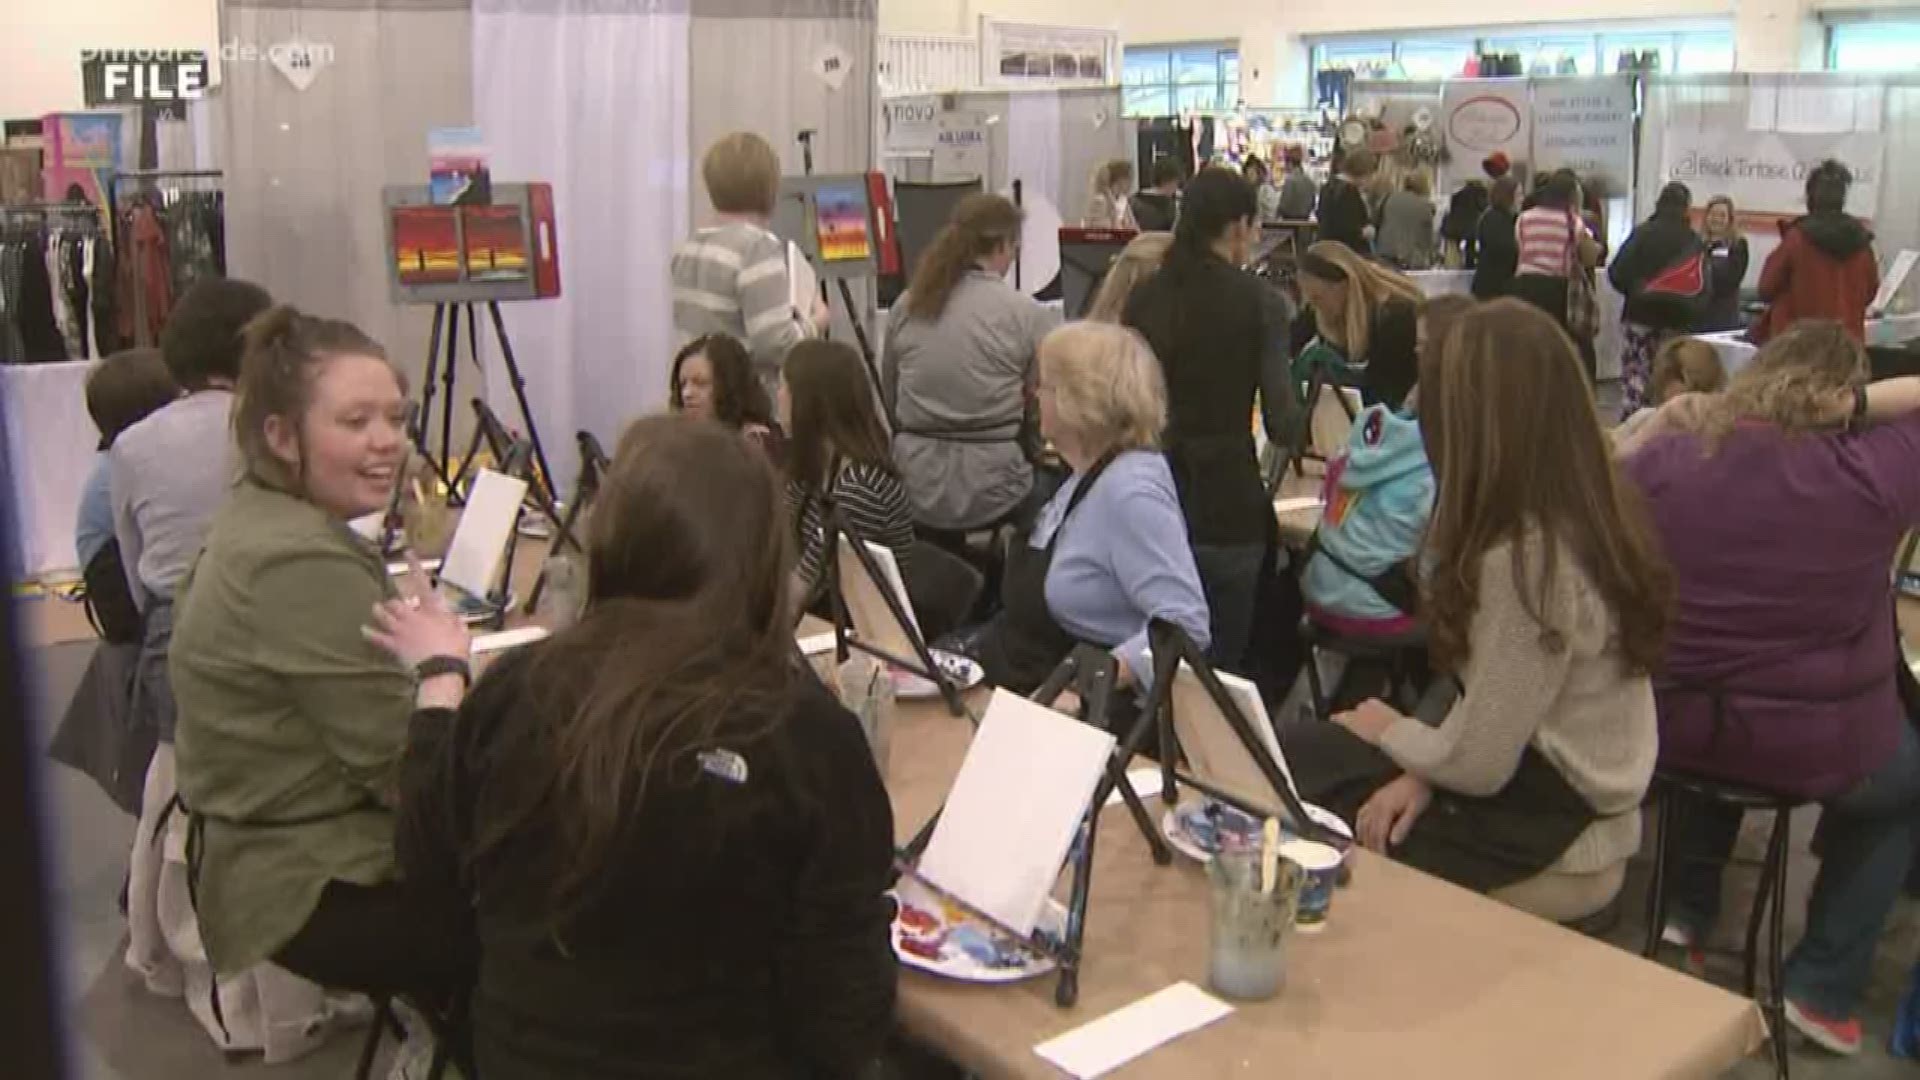 The West Michigan Women's Expo starts on Friday, March 13 through Sunday, March 15 at DeVos Place.